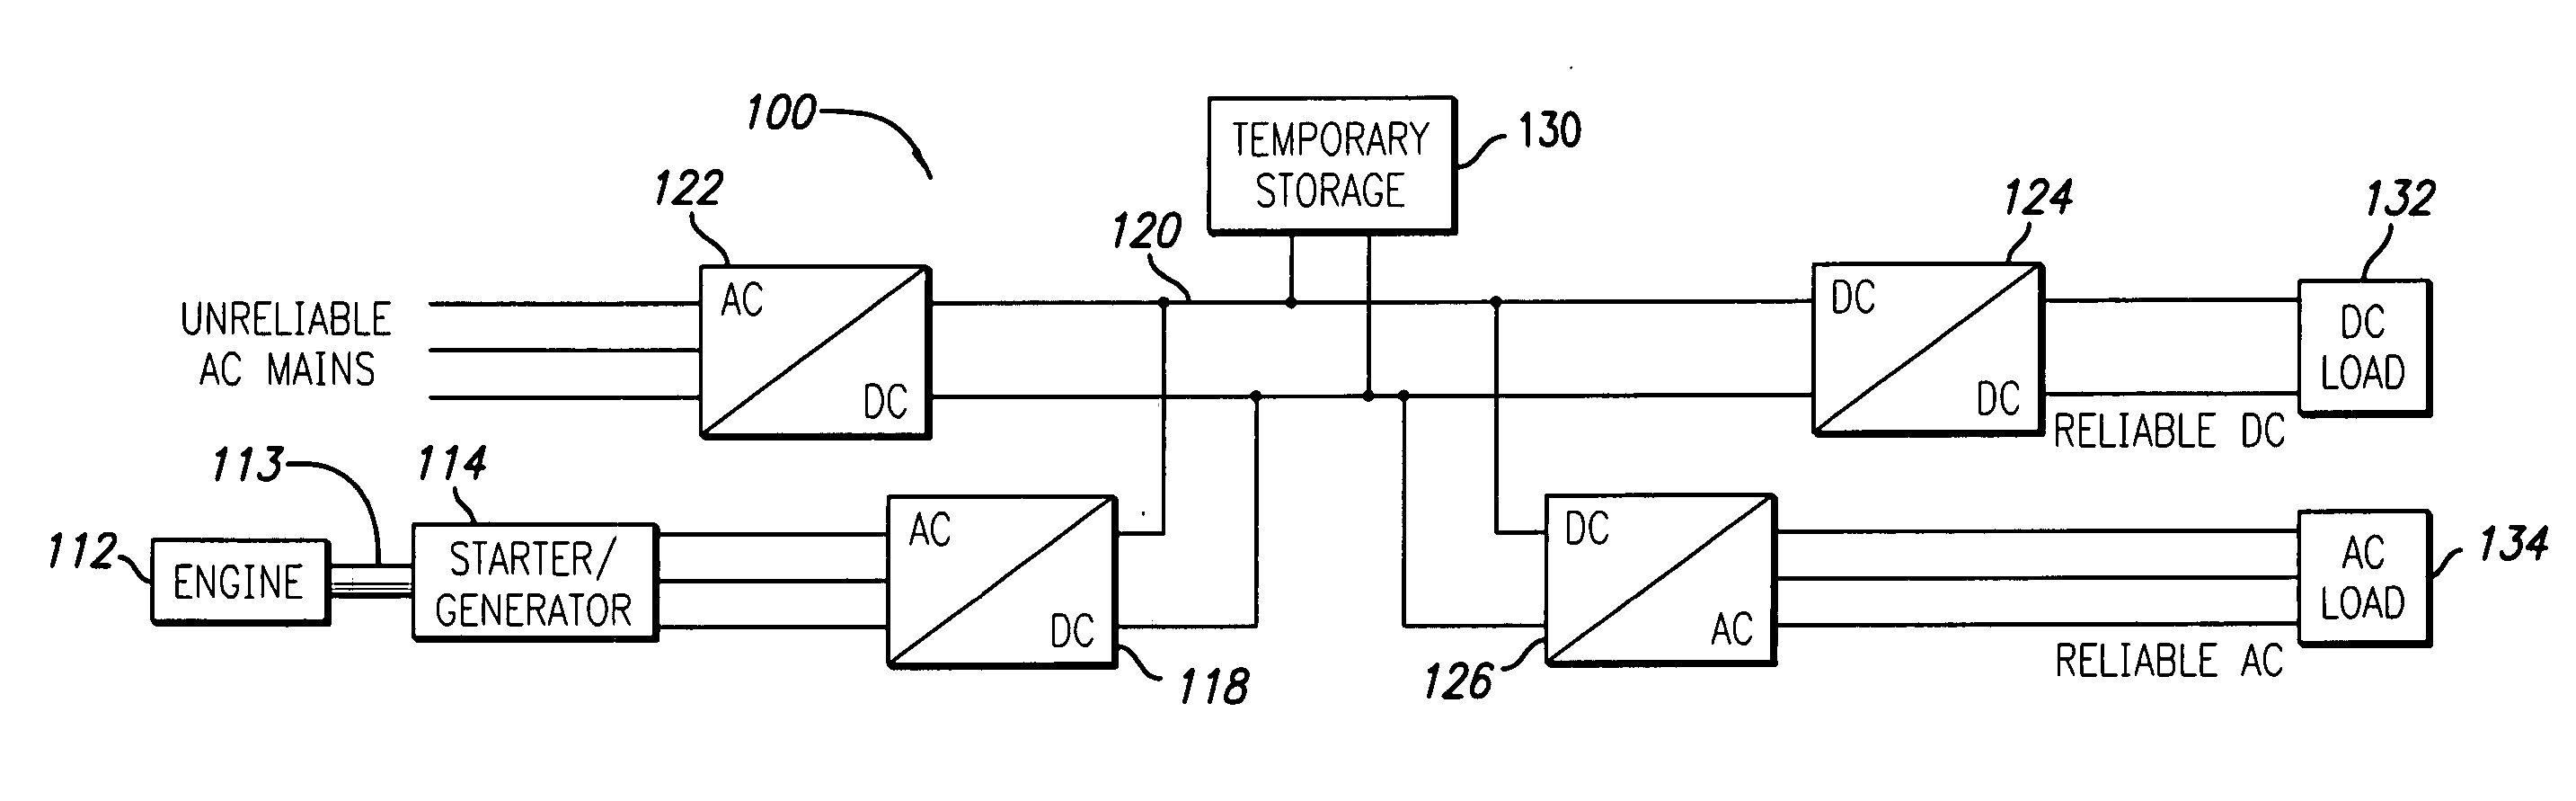 Control system for distributed power generation, conversion, and storage system